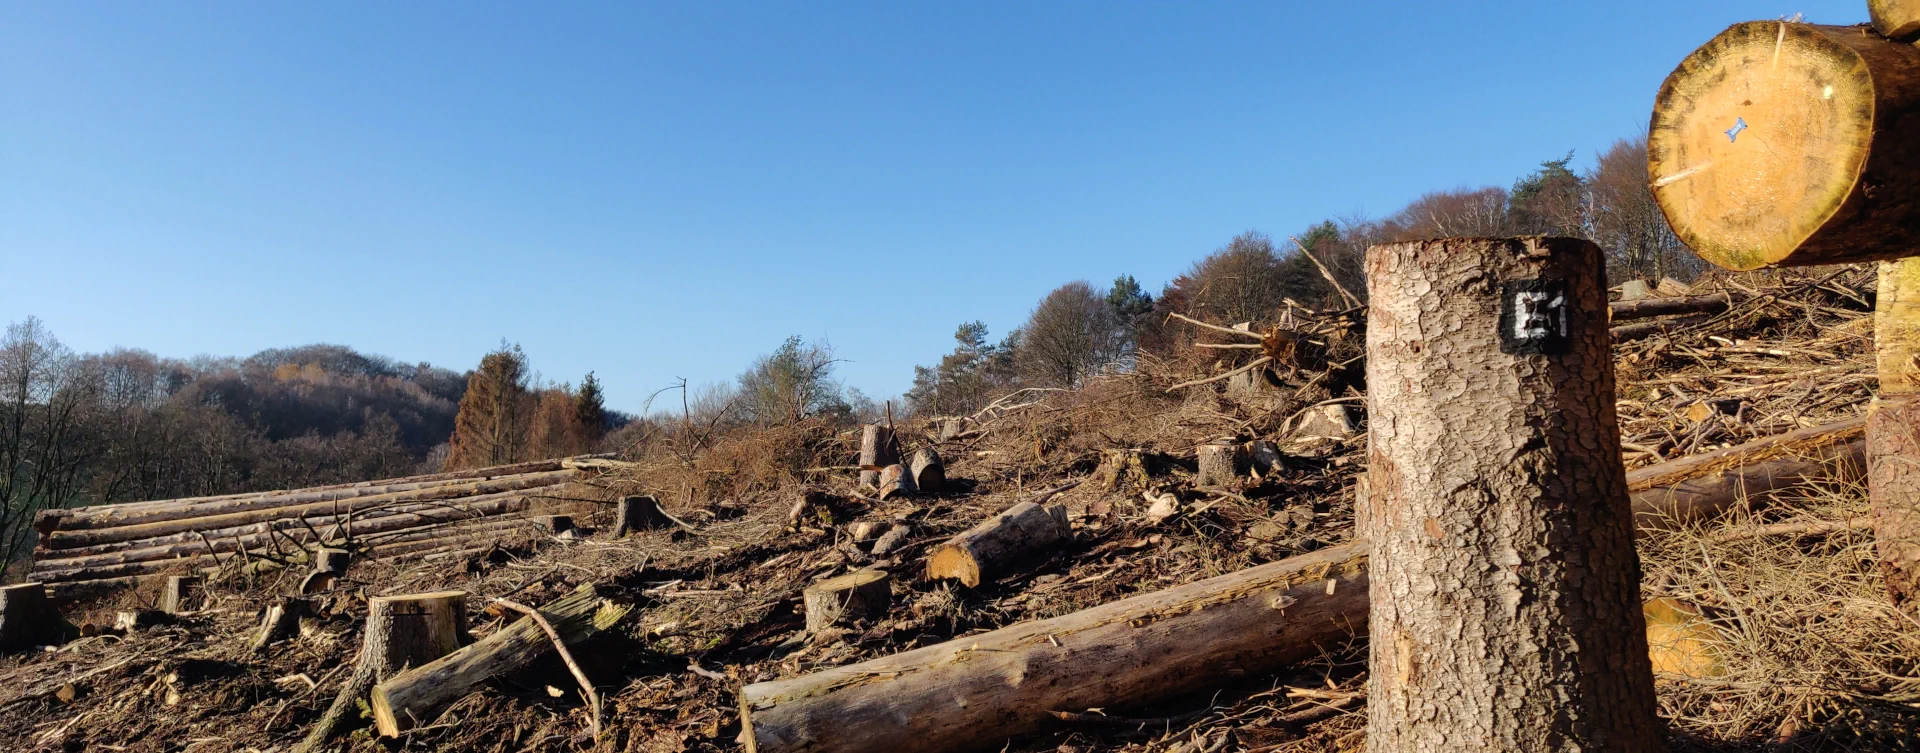 A destroyed forests, all trees have been cut down. A clearcut forest, humanity destroys nature and the environment.